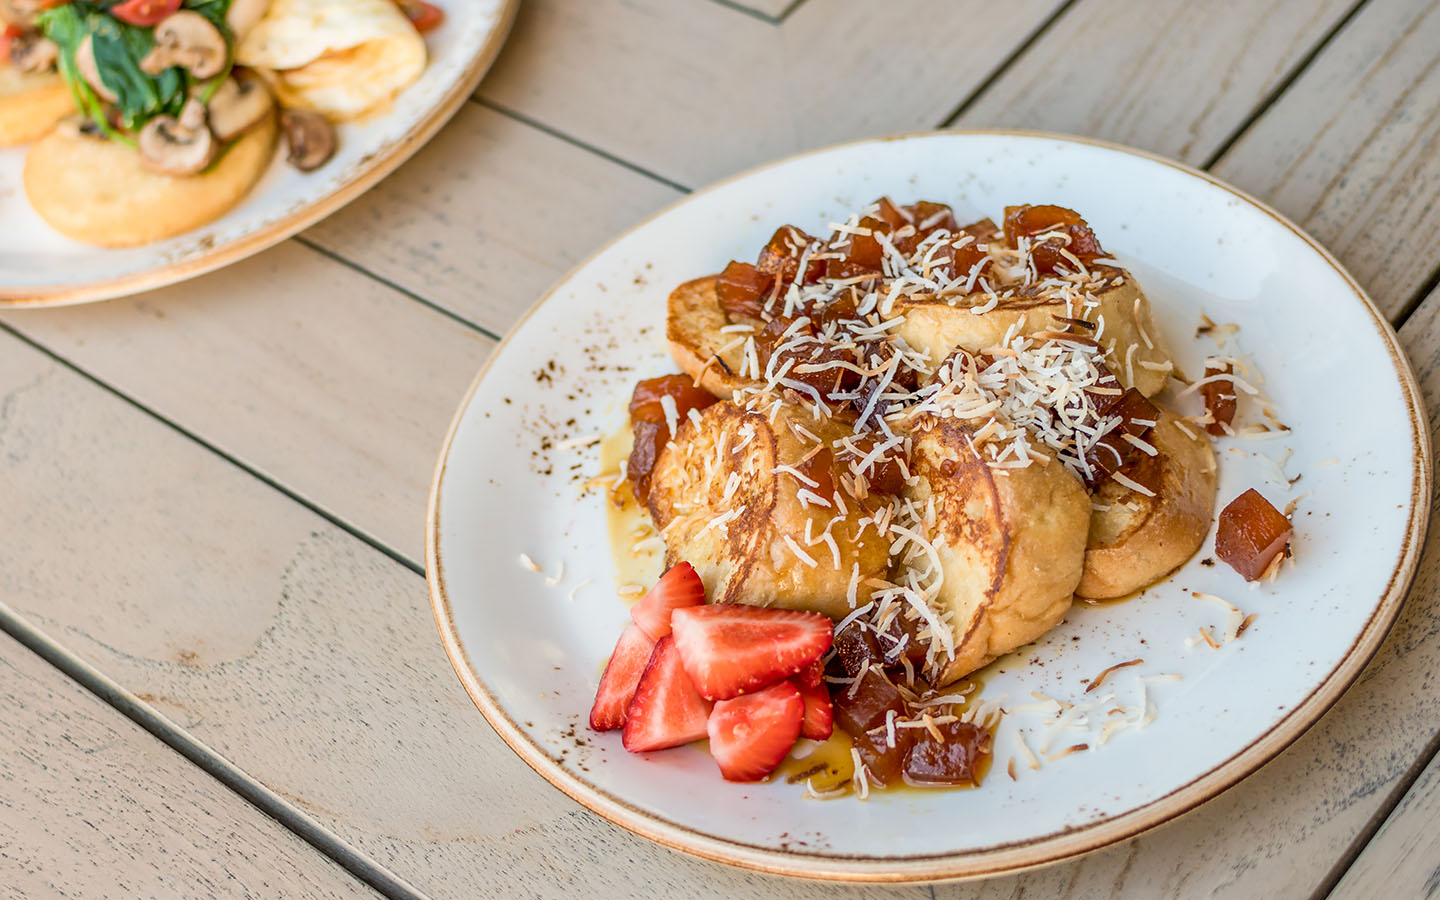 Caribbean French Toast from Amatista Cookhouse at Loews Sapphire Falls Resort.